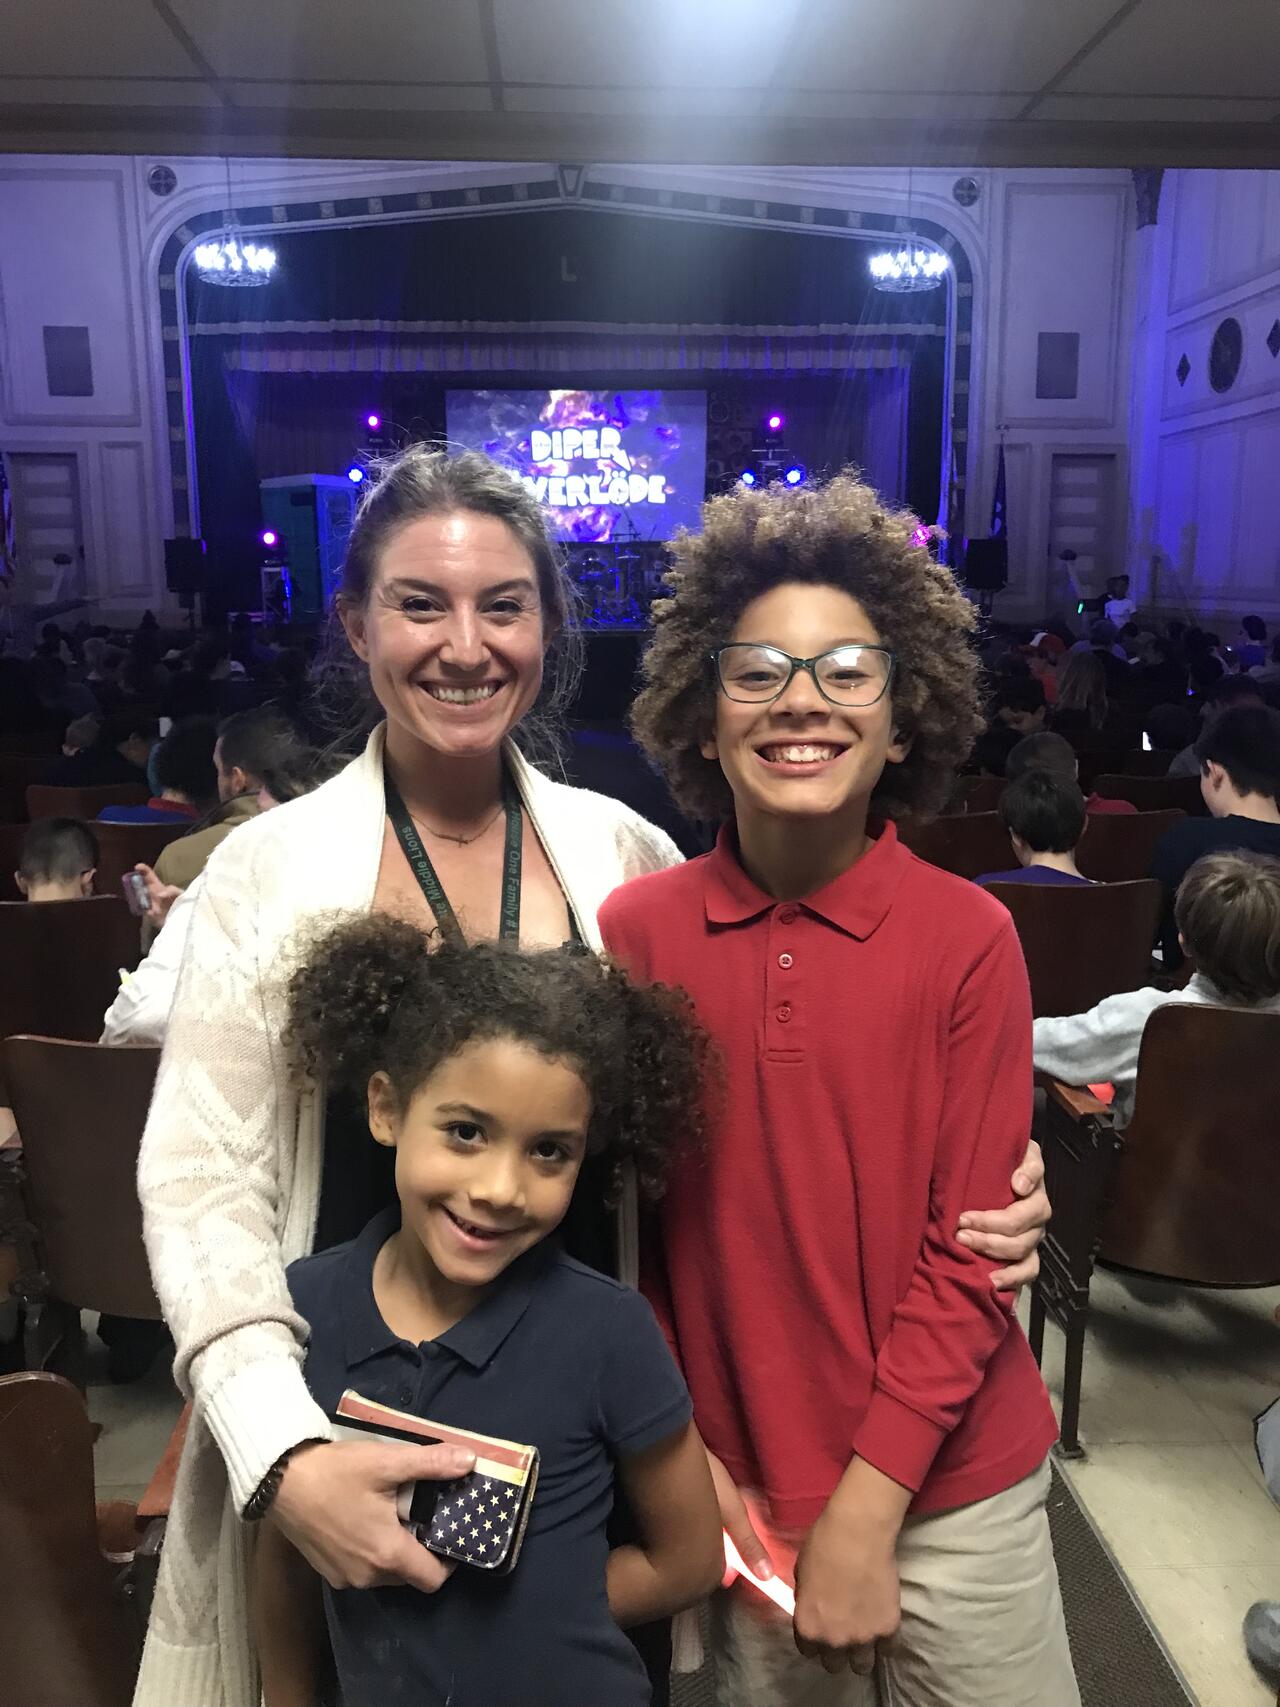 Ms. Thomas and her kids enjoying the show!